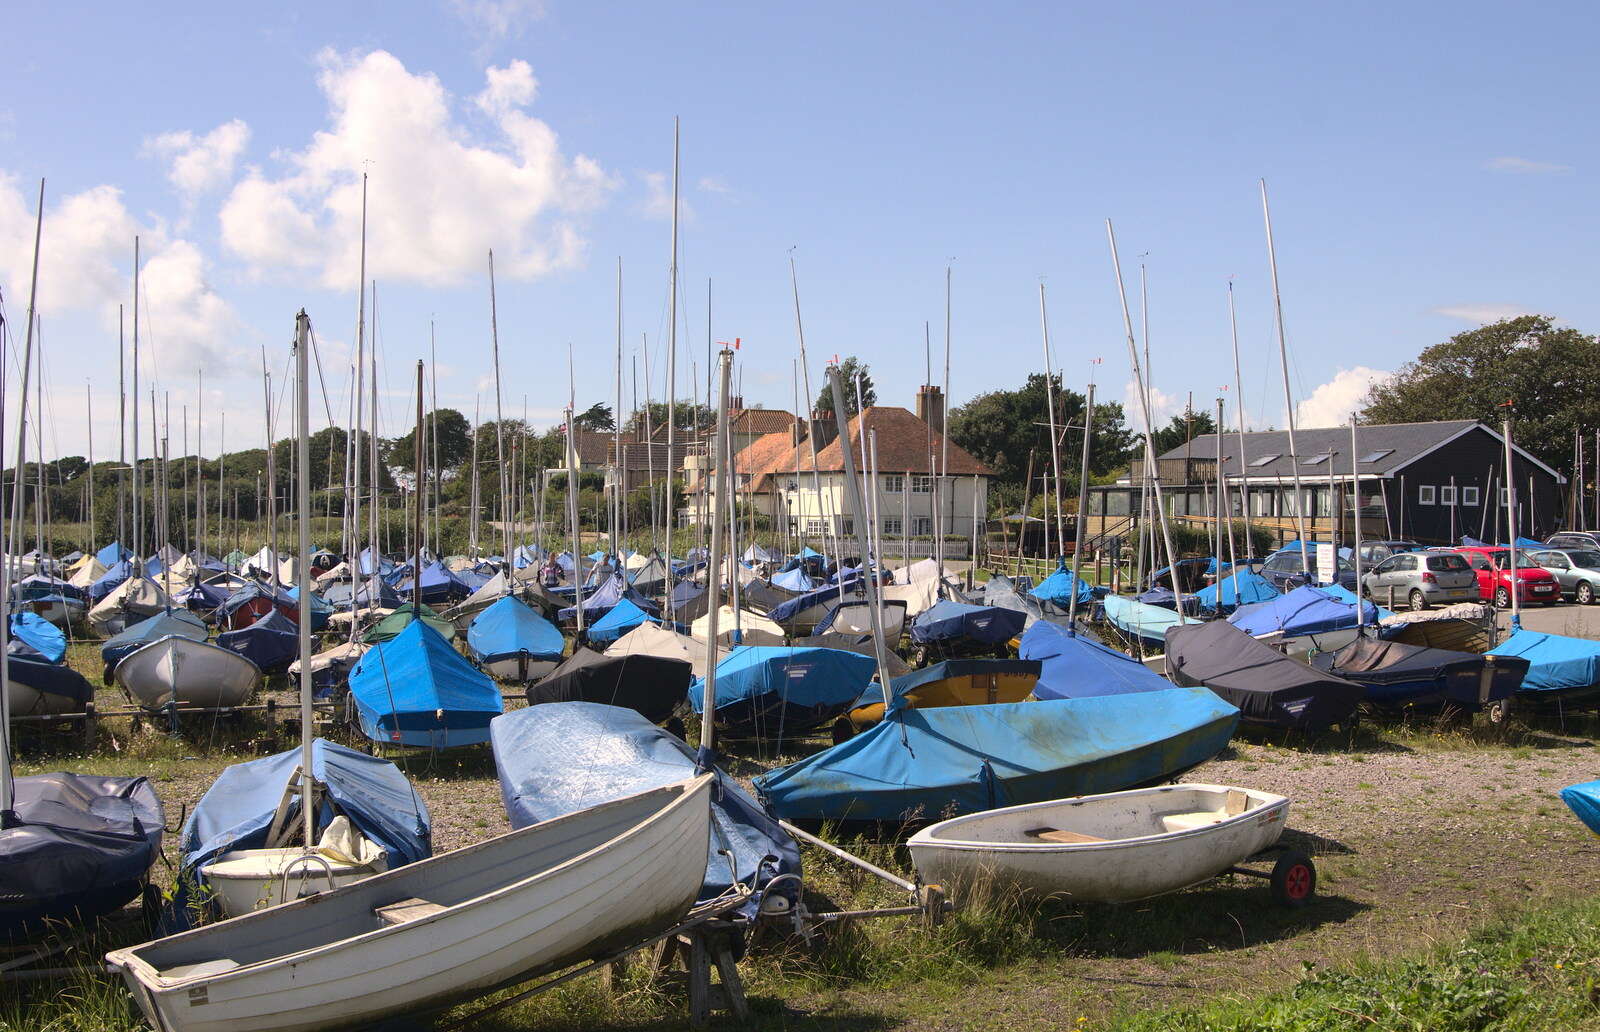 More dinghies from A Trip to Hurst Castle, Keyhaven, Hampshire - 28th August 2015